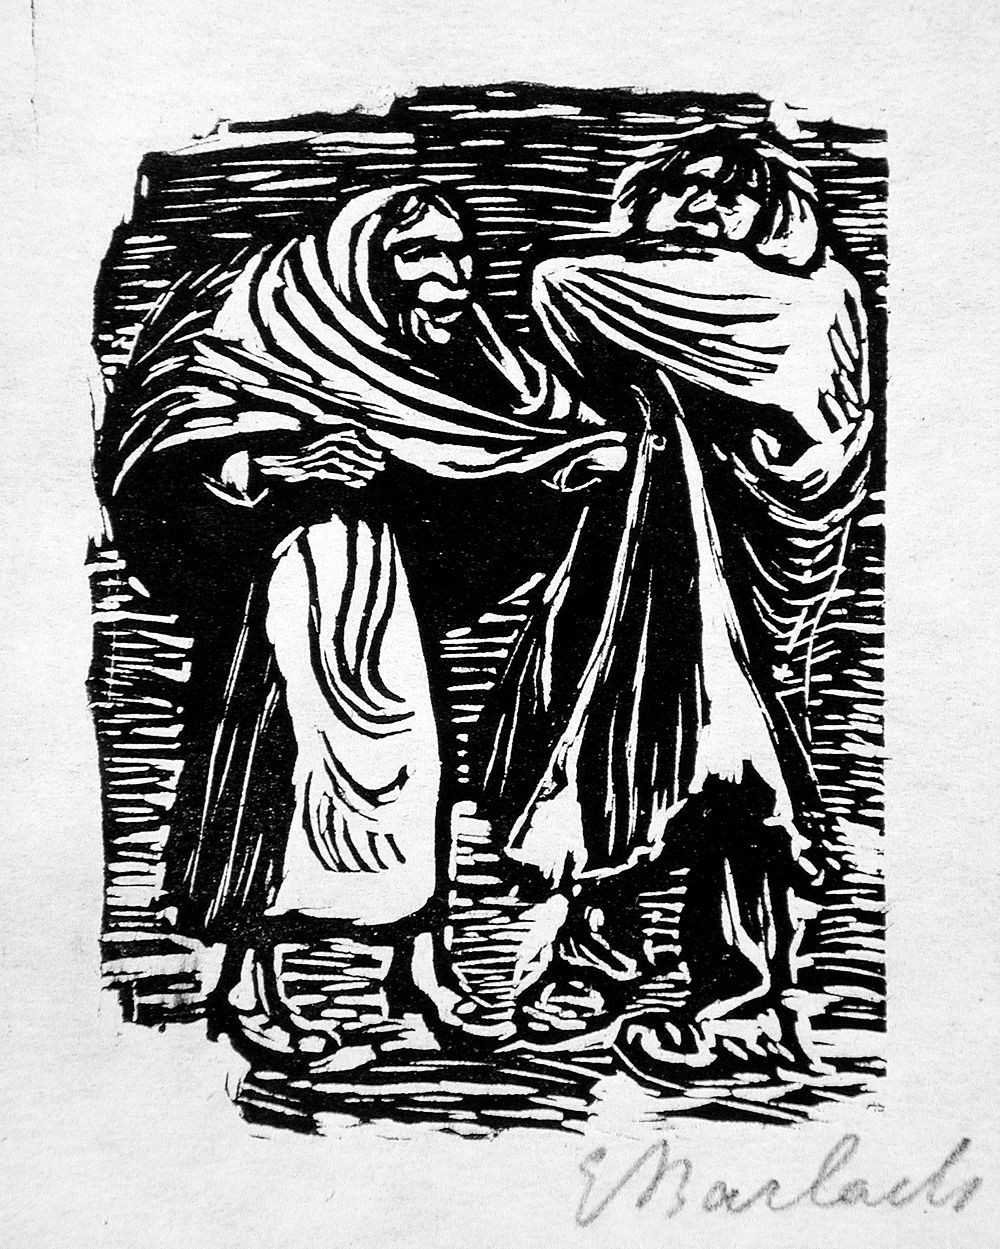 The cloak is more patch than whole cloth by Ernst Barlach